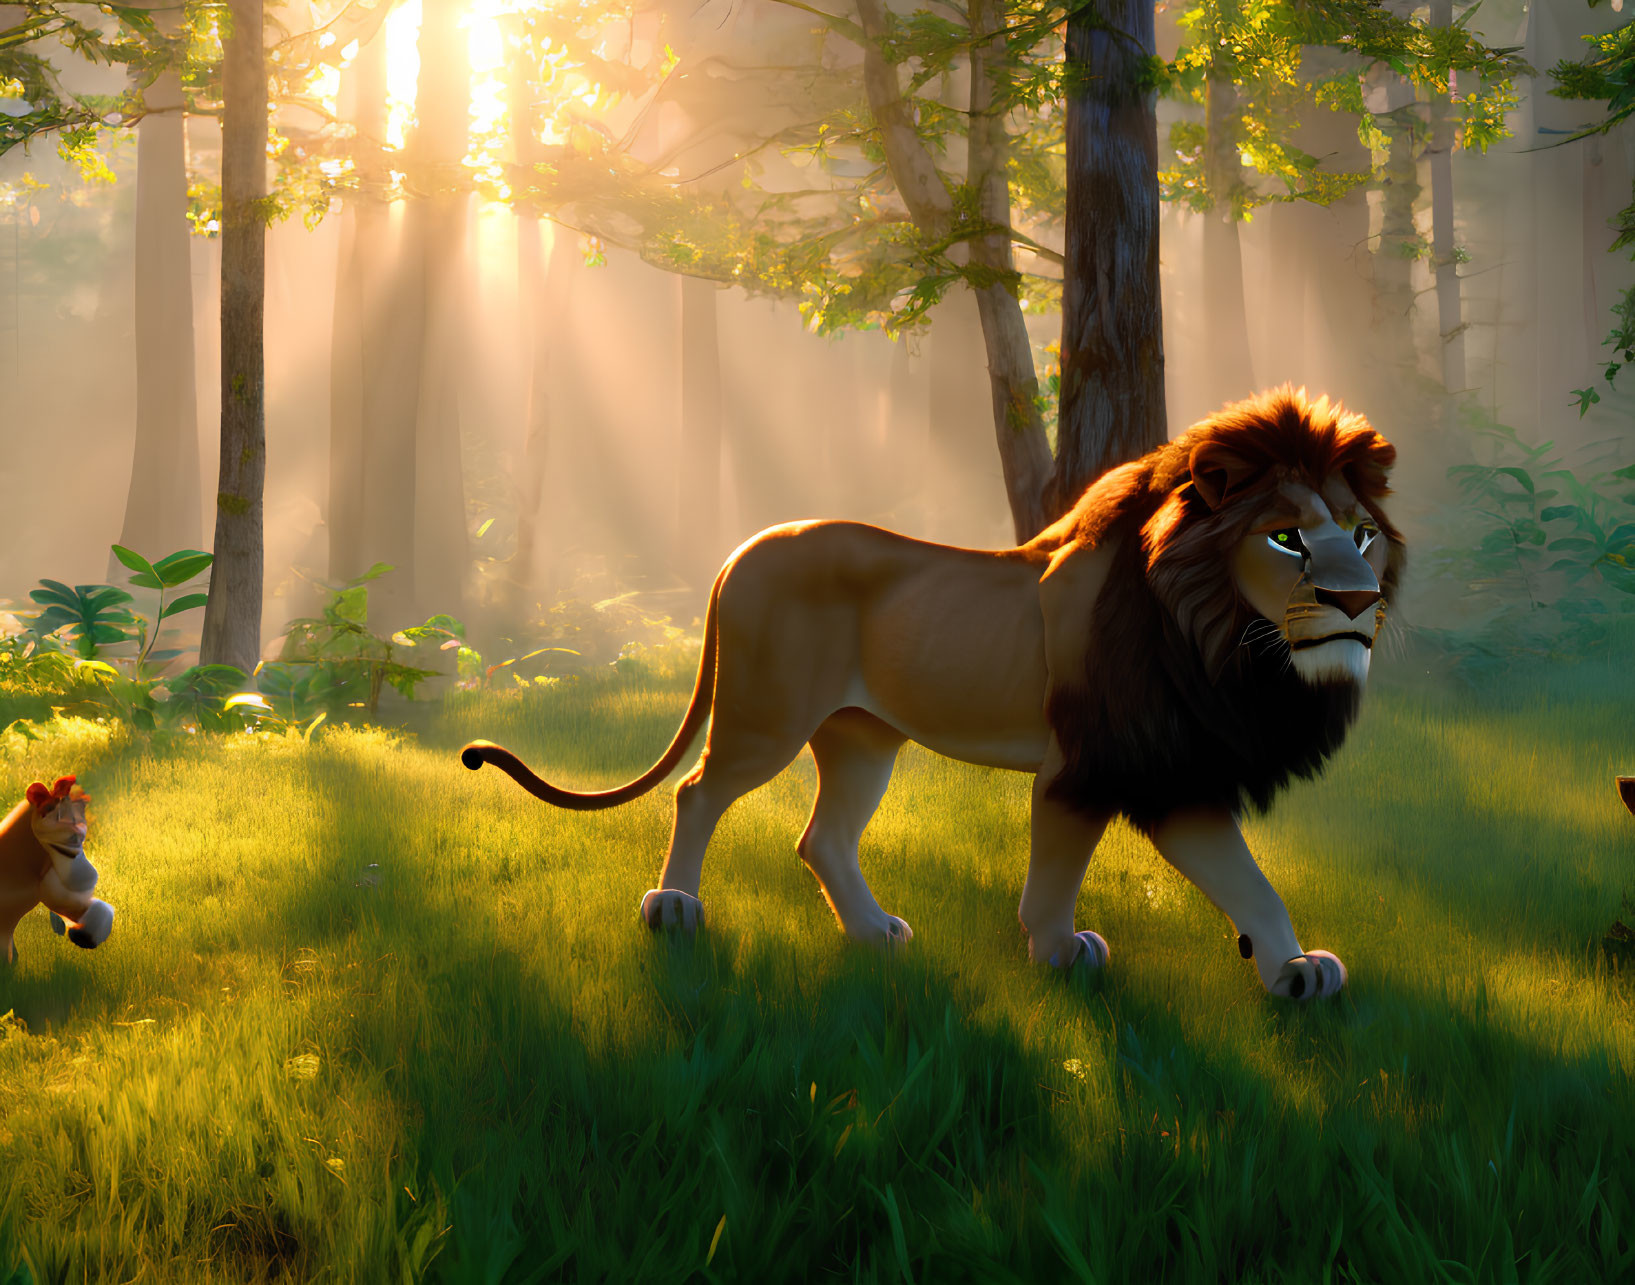 Animated lion and cub in sunlit forest scene